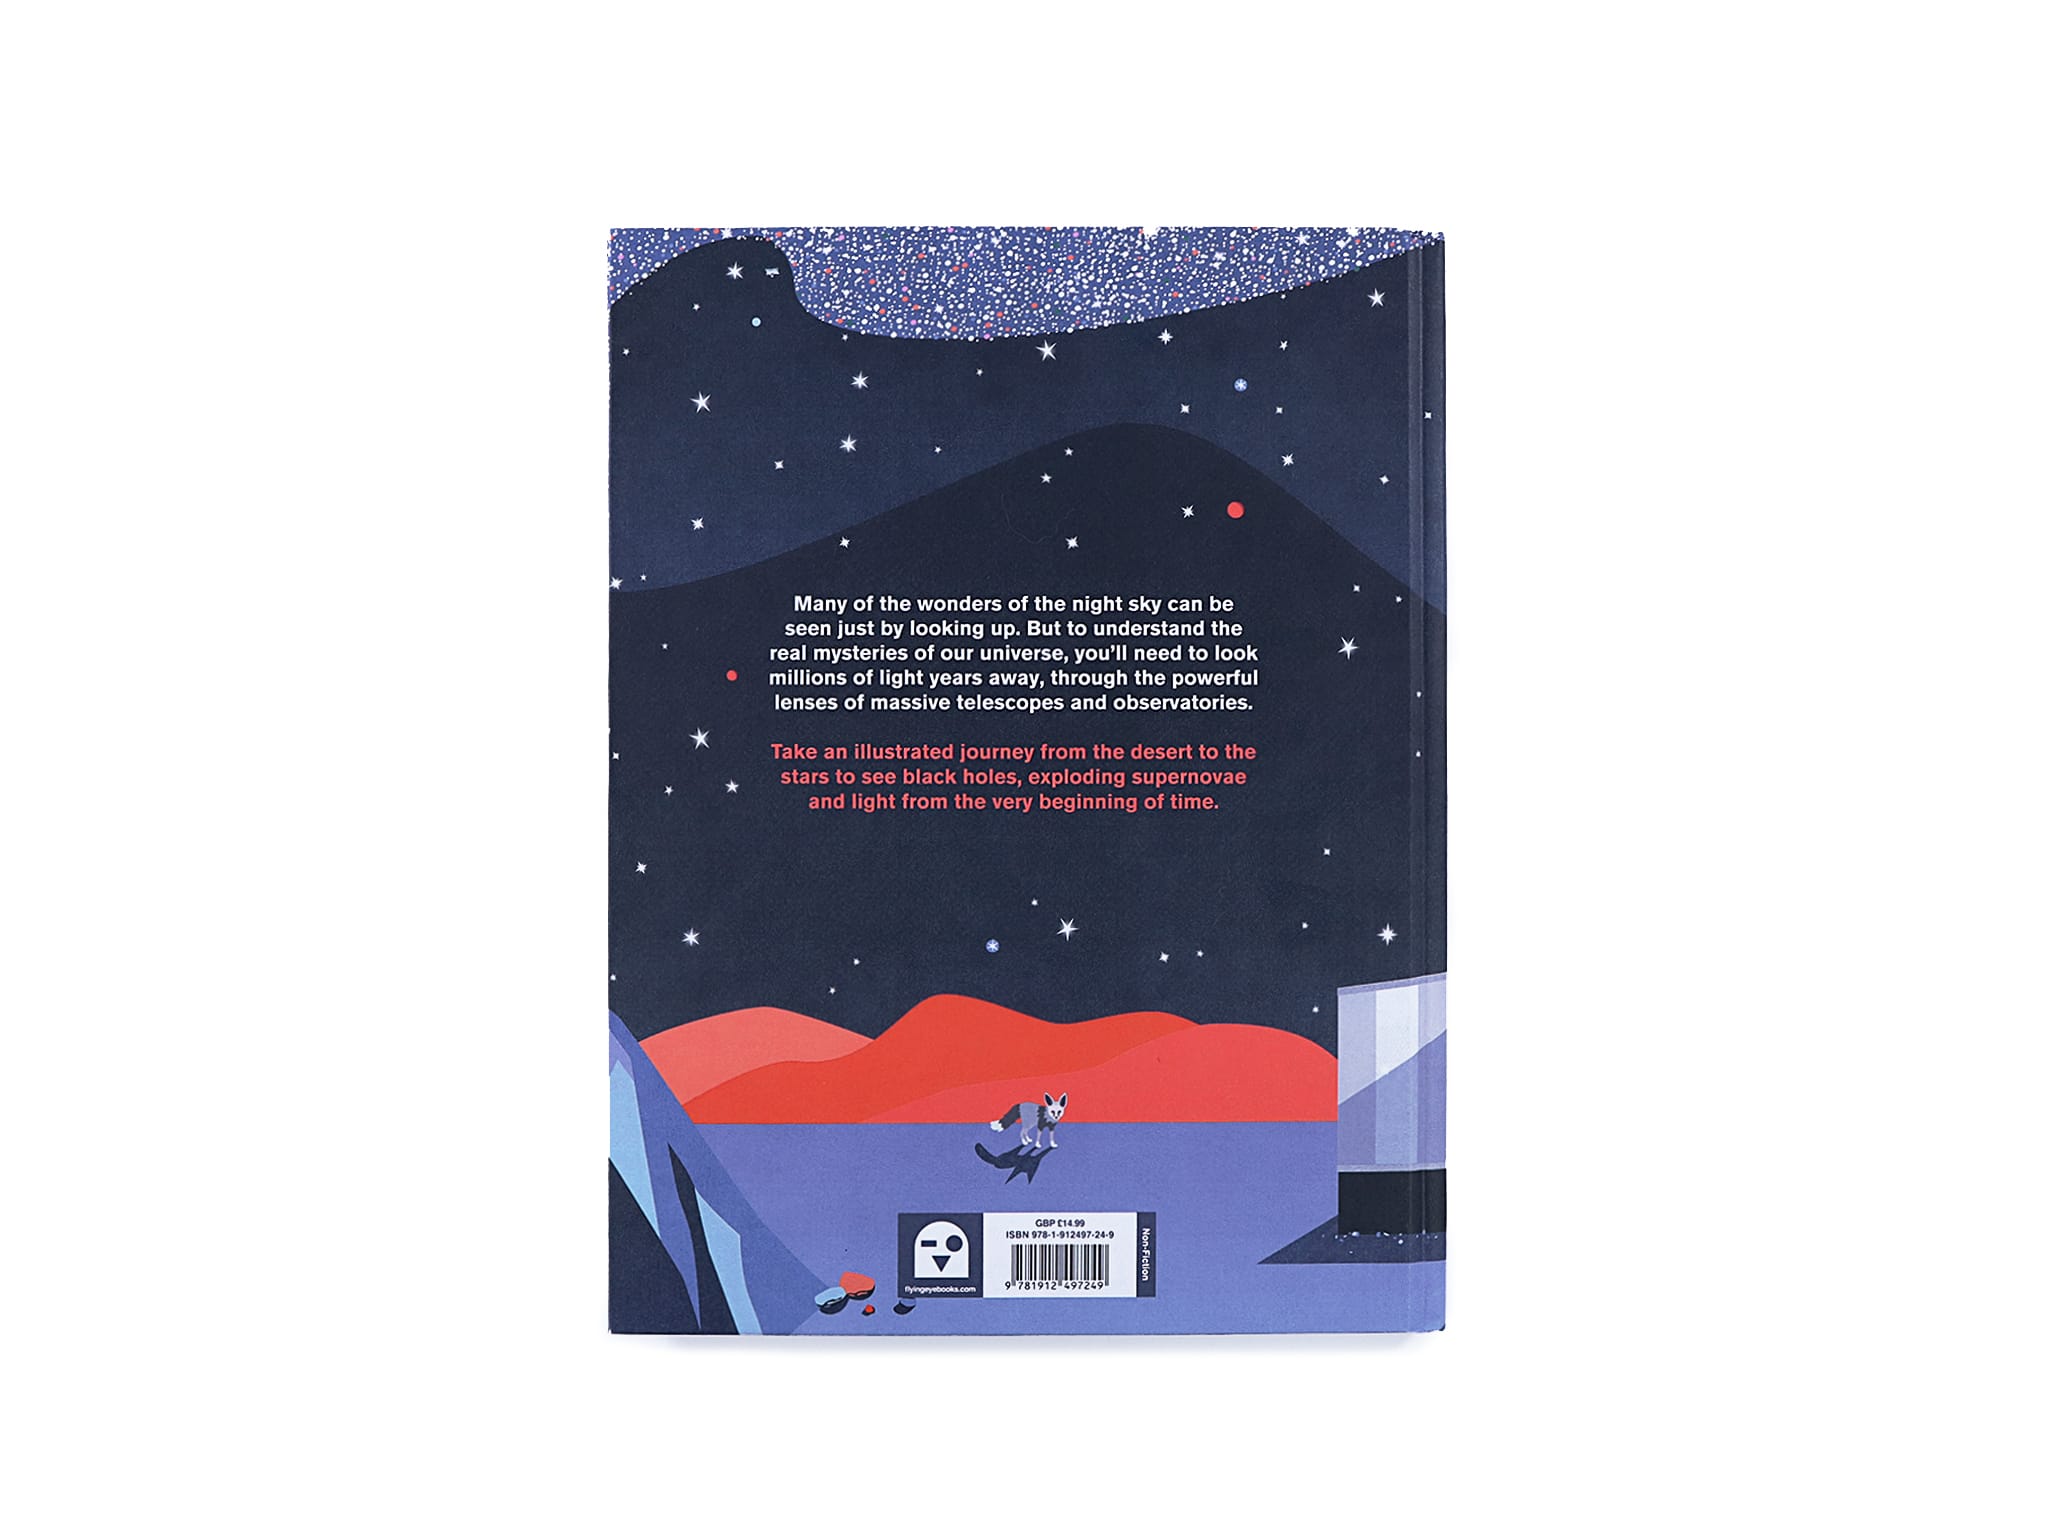 Looking Up: An Illustrated Guide to Telescopes